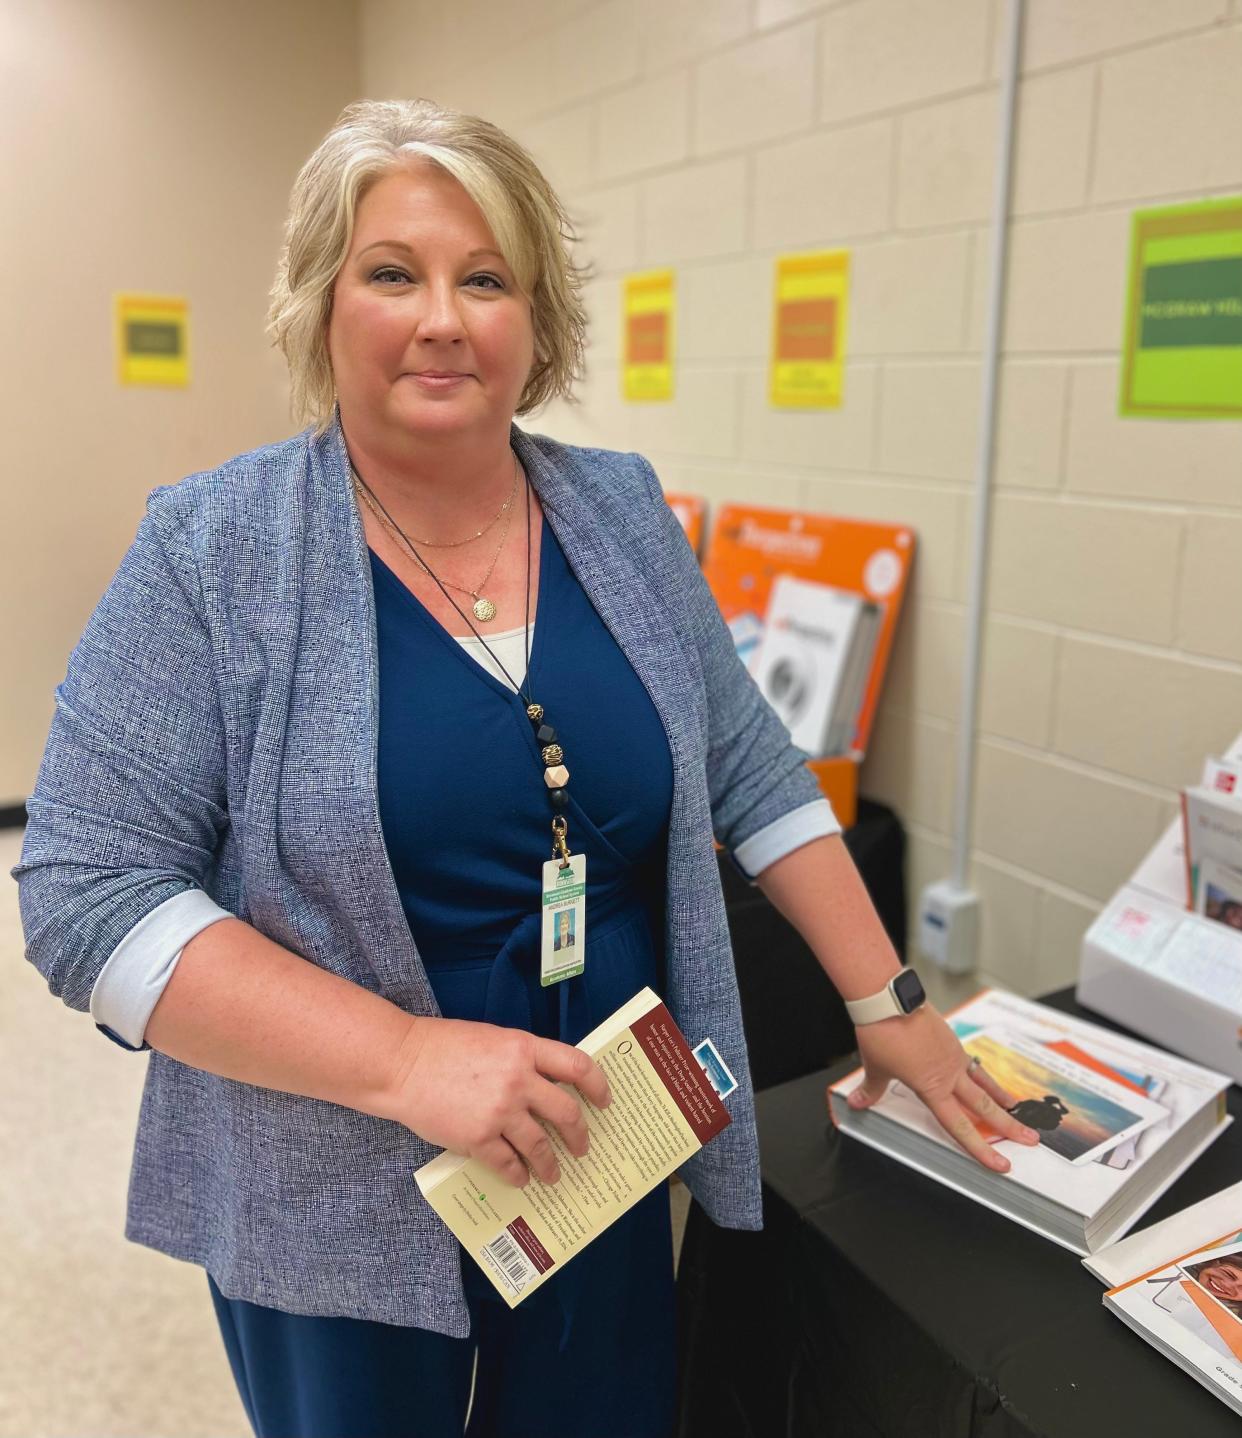 SCCPSS Director of Curriculum Programming, Andrea Burkiett shares a sneak peak of Study Sync's English language arts (ELA) curriculum option on display at Leiston Shuman Elementary School ahead of the district's public curriculum review to be held on Thursday Nov. 16.